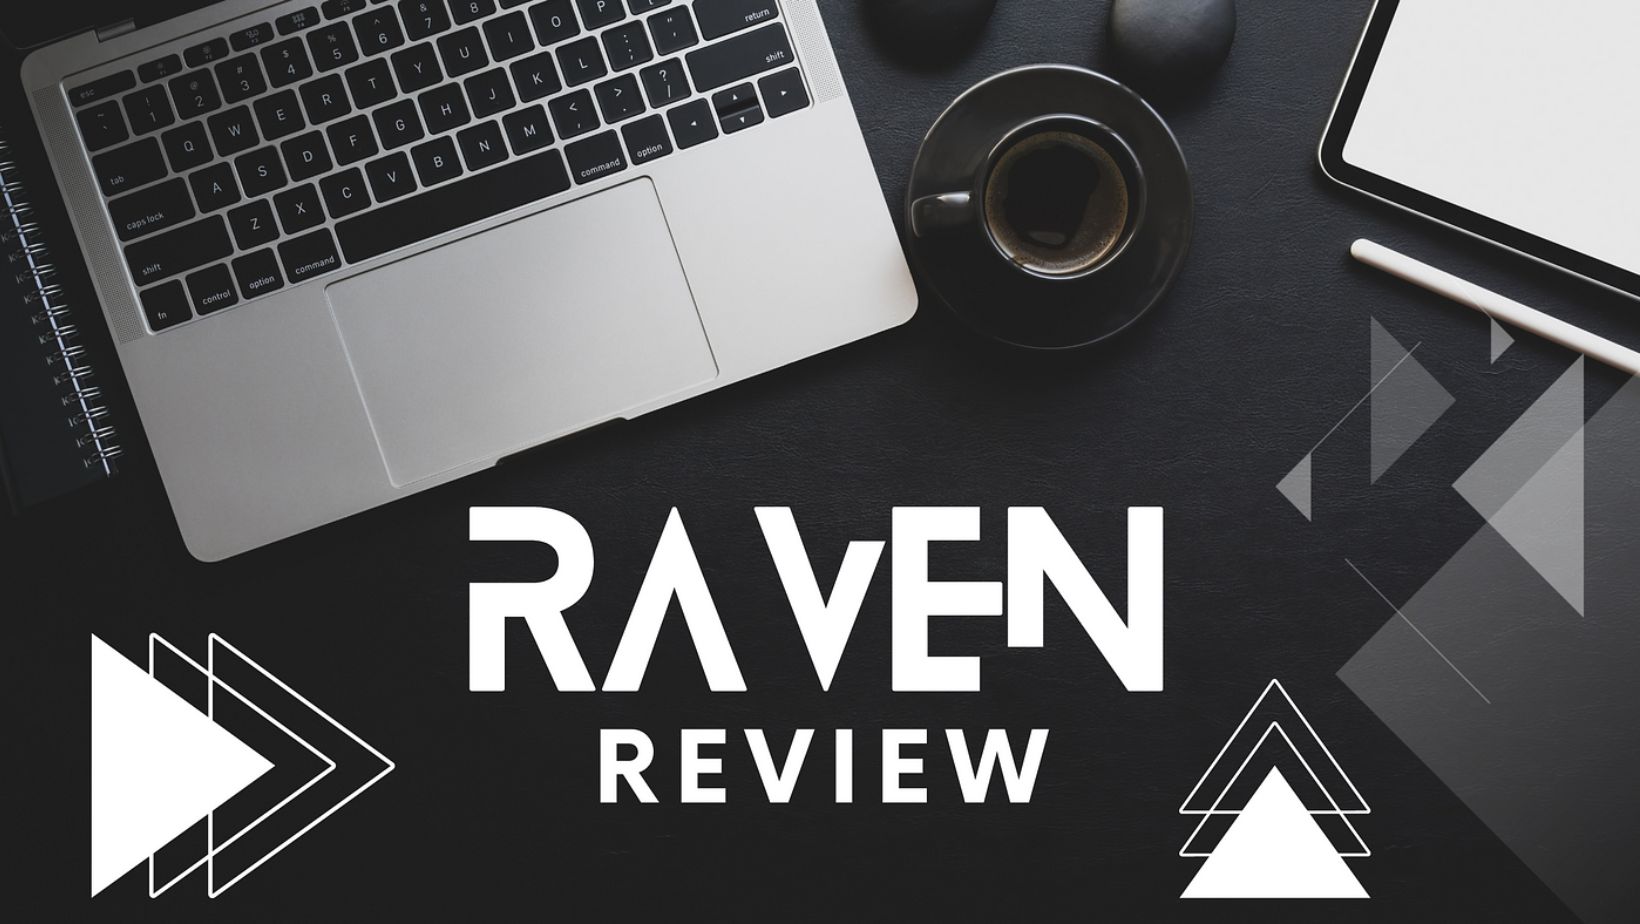 Raven Gadgets: The Latest Tech Accessories for You